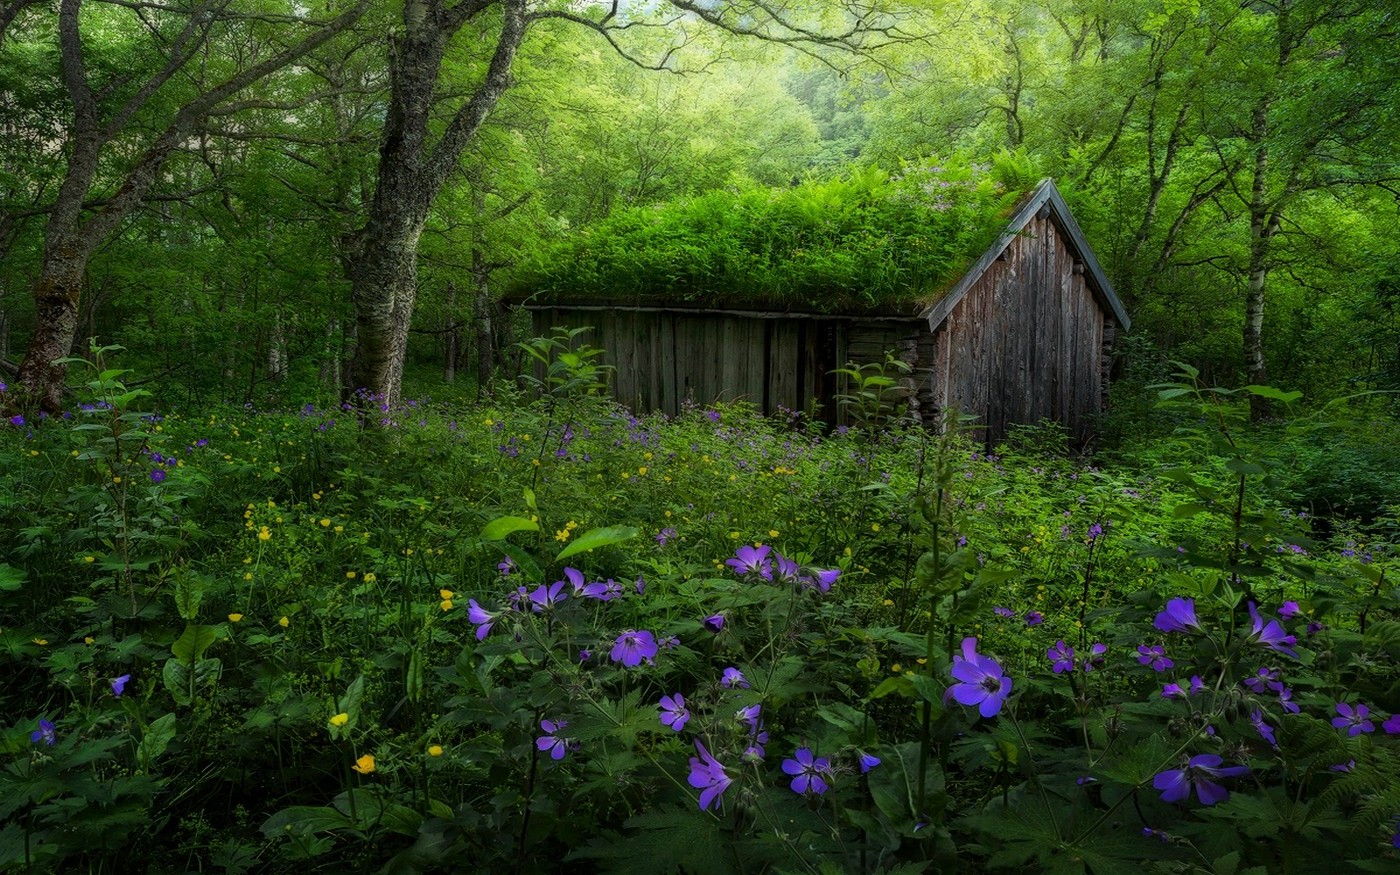 nature, Landscape, Forest, Spring, Norway, Wildflowers, Hut, Abandoned, Trees, Green, Purple, Yellow, Shrubs Wallpaper